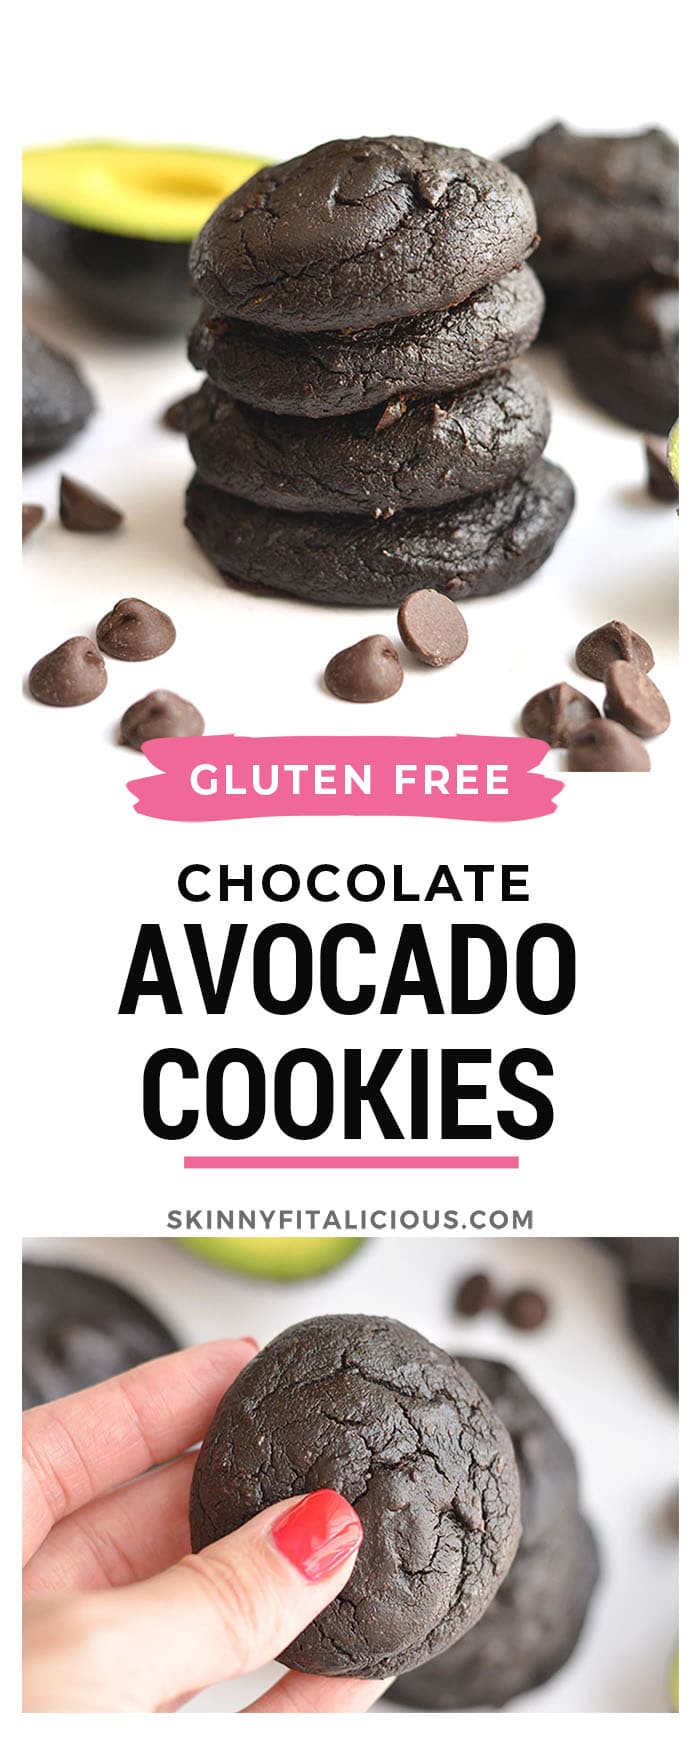 These Chocolate Avocado Cookies are rich, fudgy & melt in your mouth! Avocados are substituted for oil making the cookies a healthier, vitamin packed treat. You'll never know they're made with avocados! Gluten Free + Low Calorie 